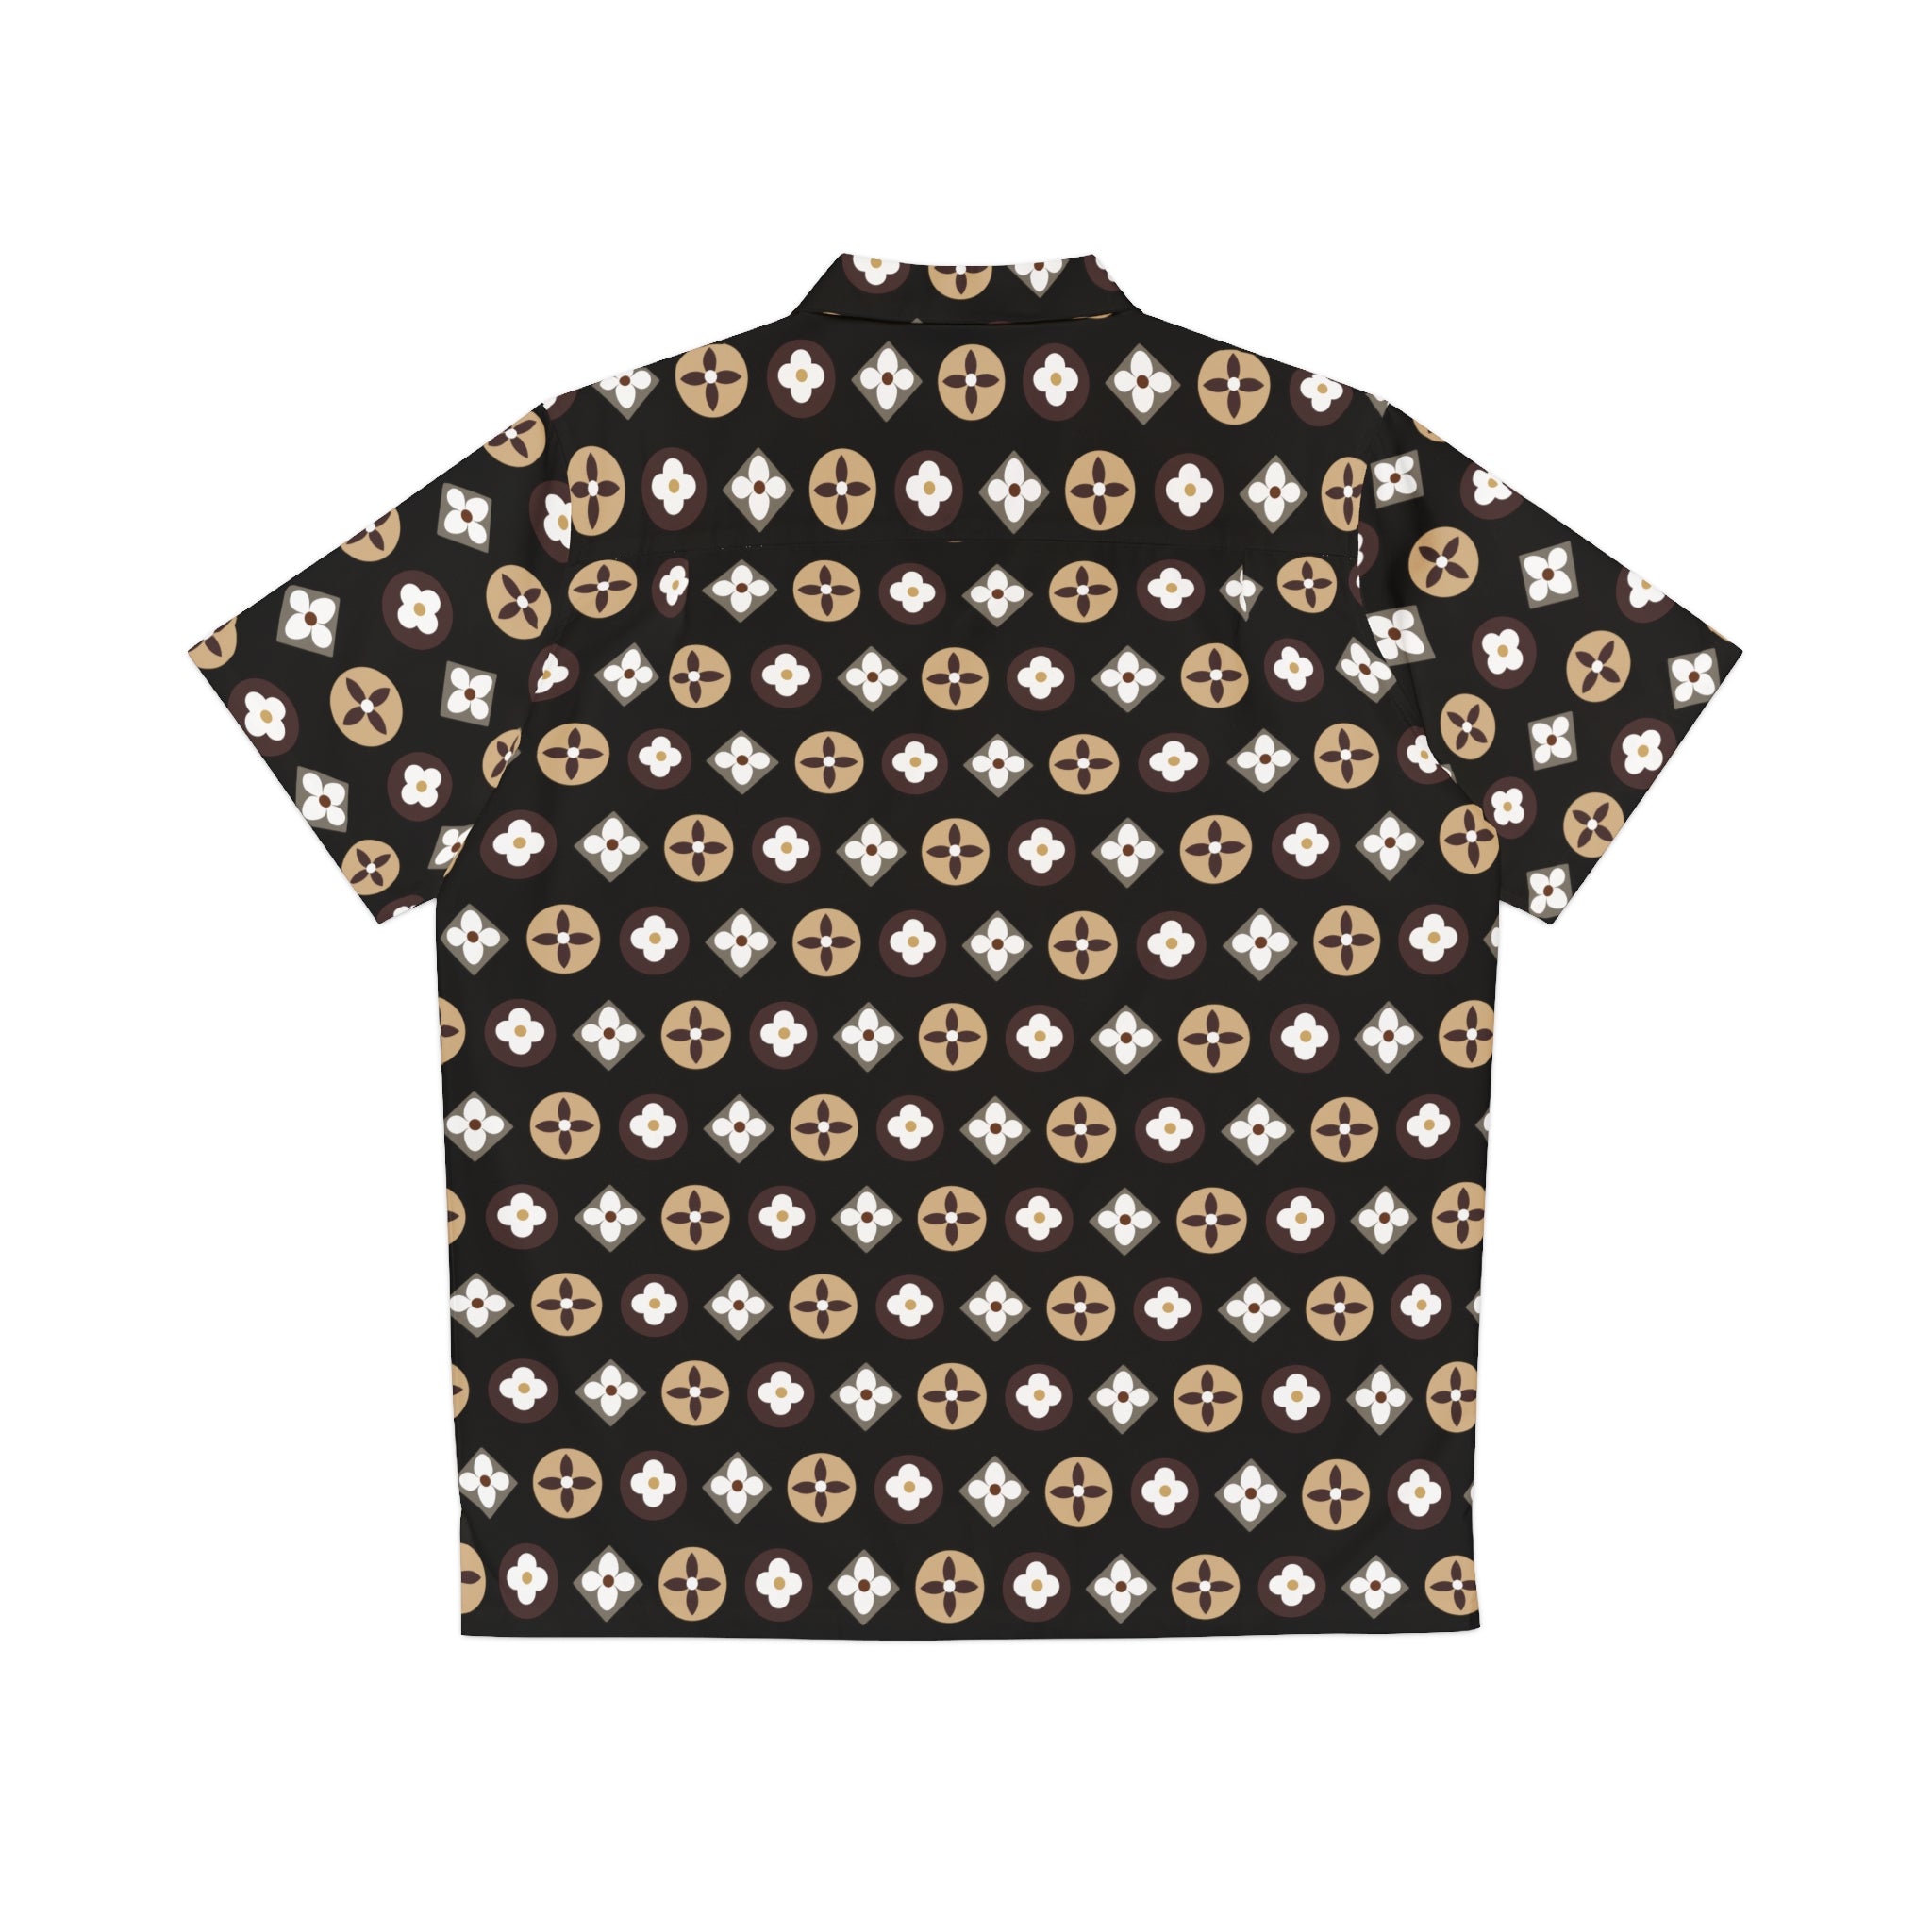  Groove Collection Trilogy of Icons Pattern (Browns) Black Unisex Gender Neutral Button Up Shirt, Hawaiian Shirt Men's Shirts